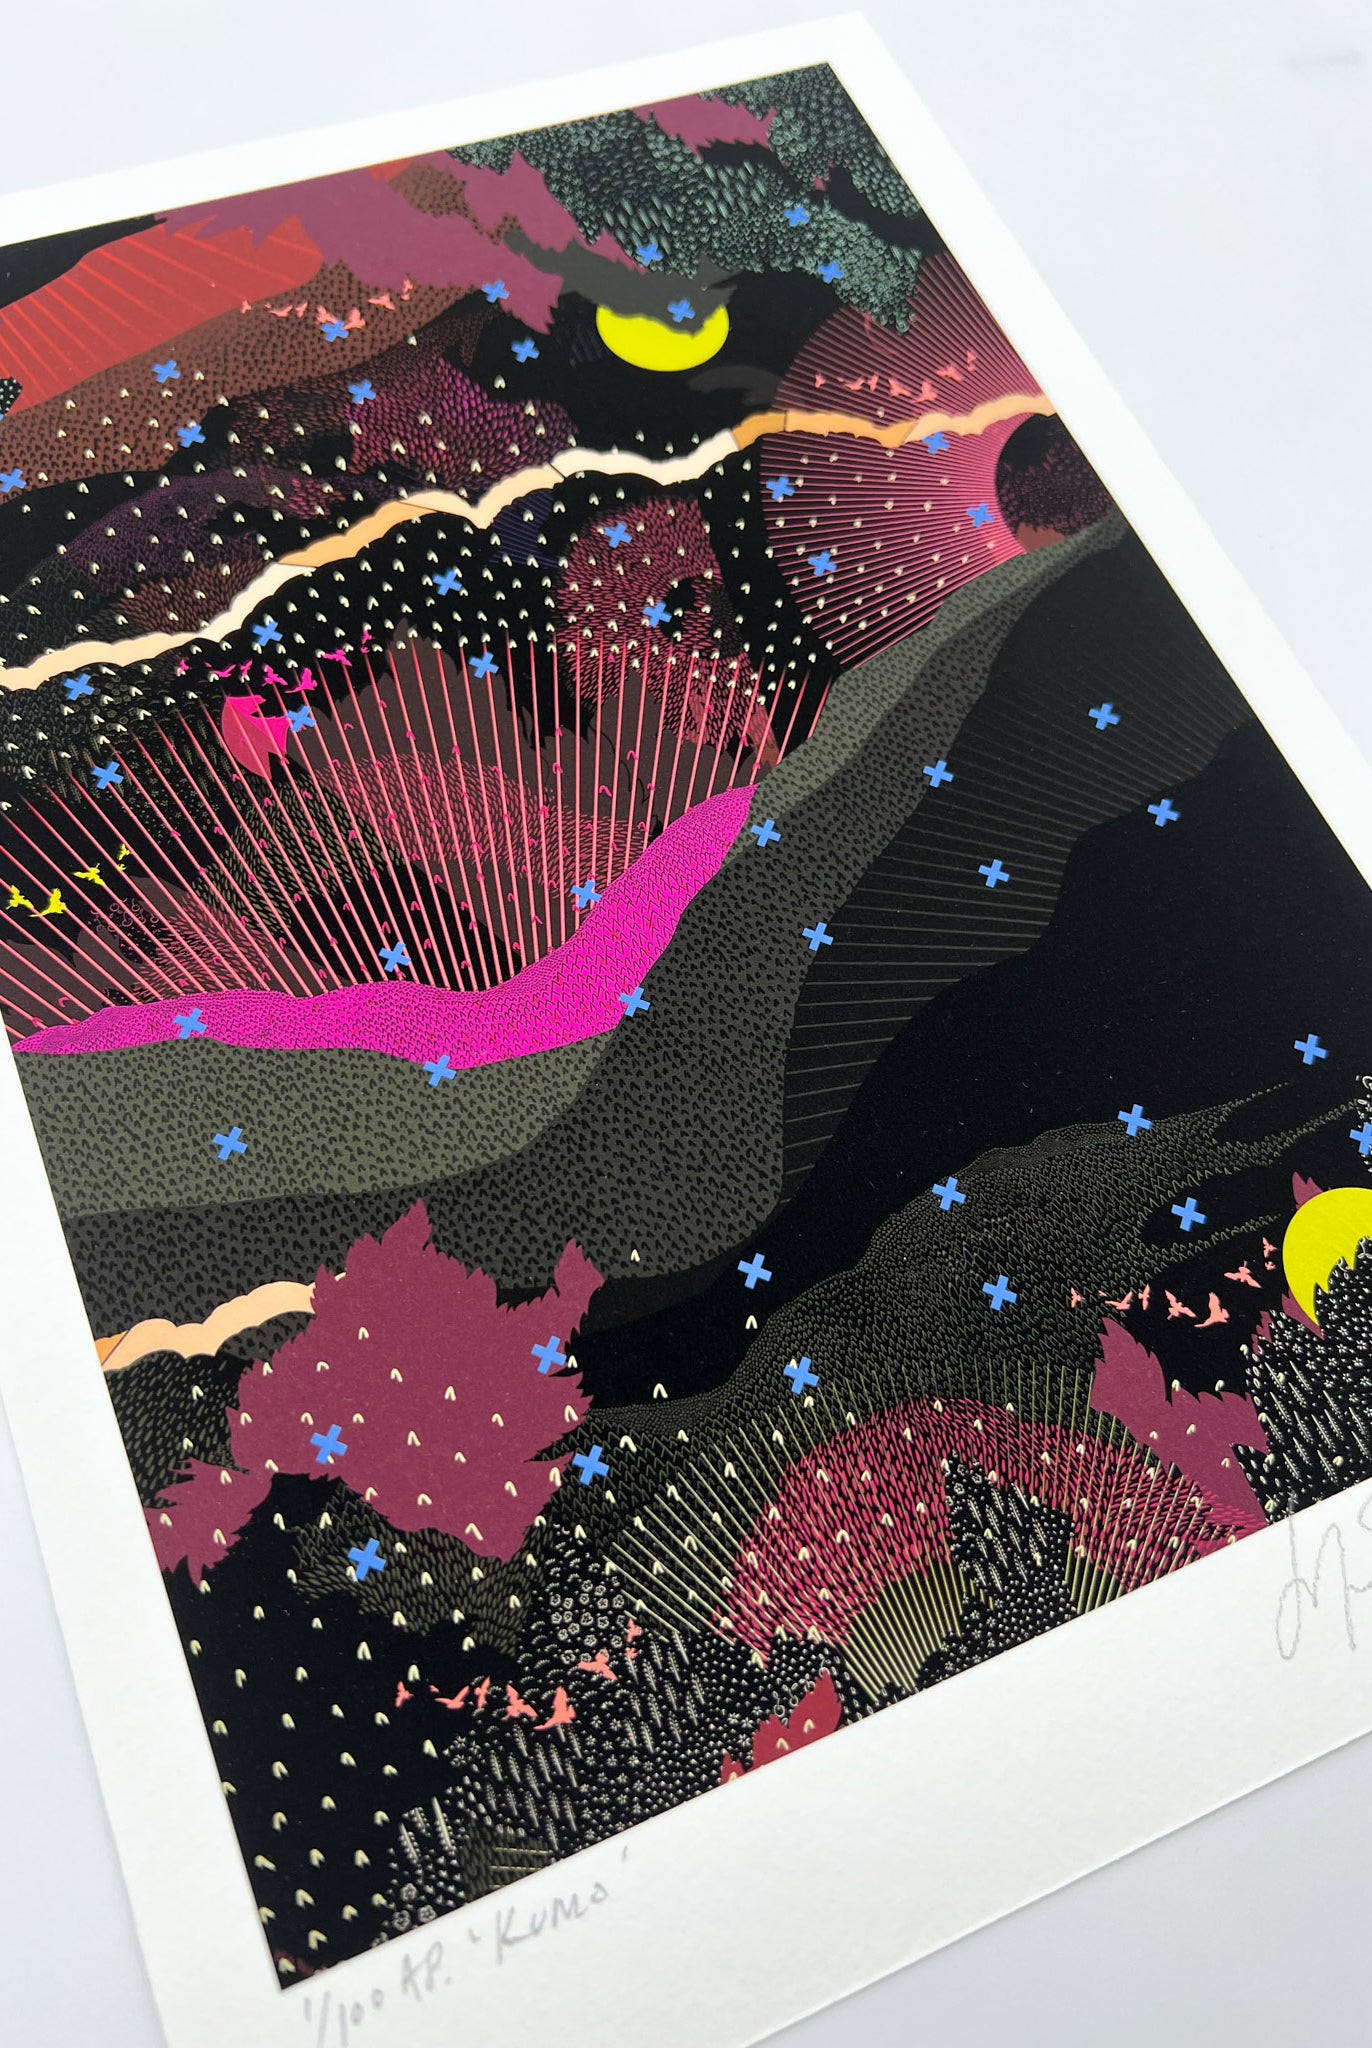 A giclee print with landscape design in greens and pinks with lime green moon details